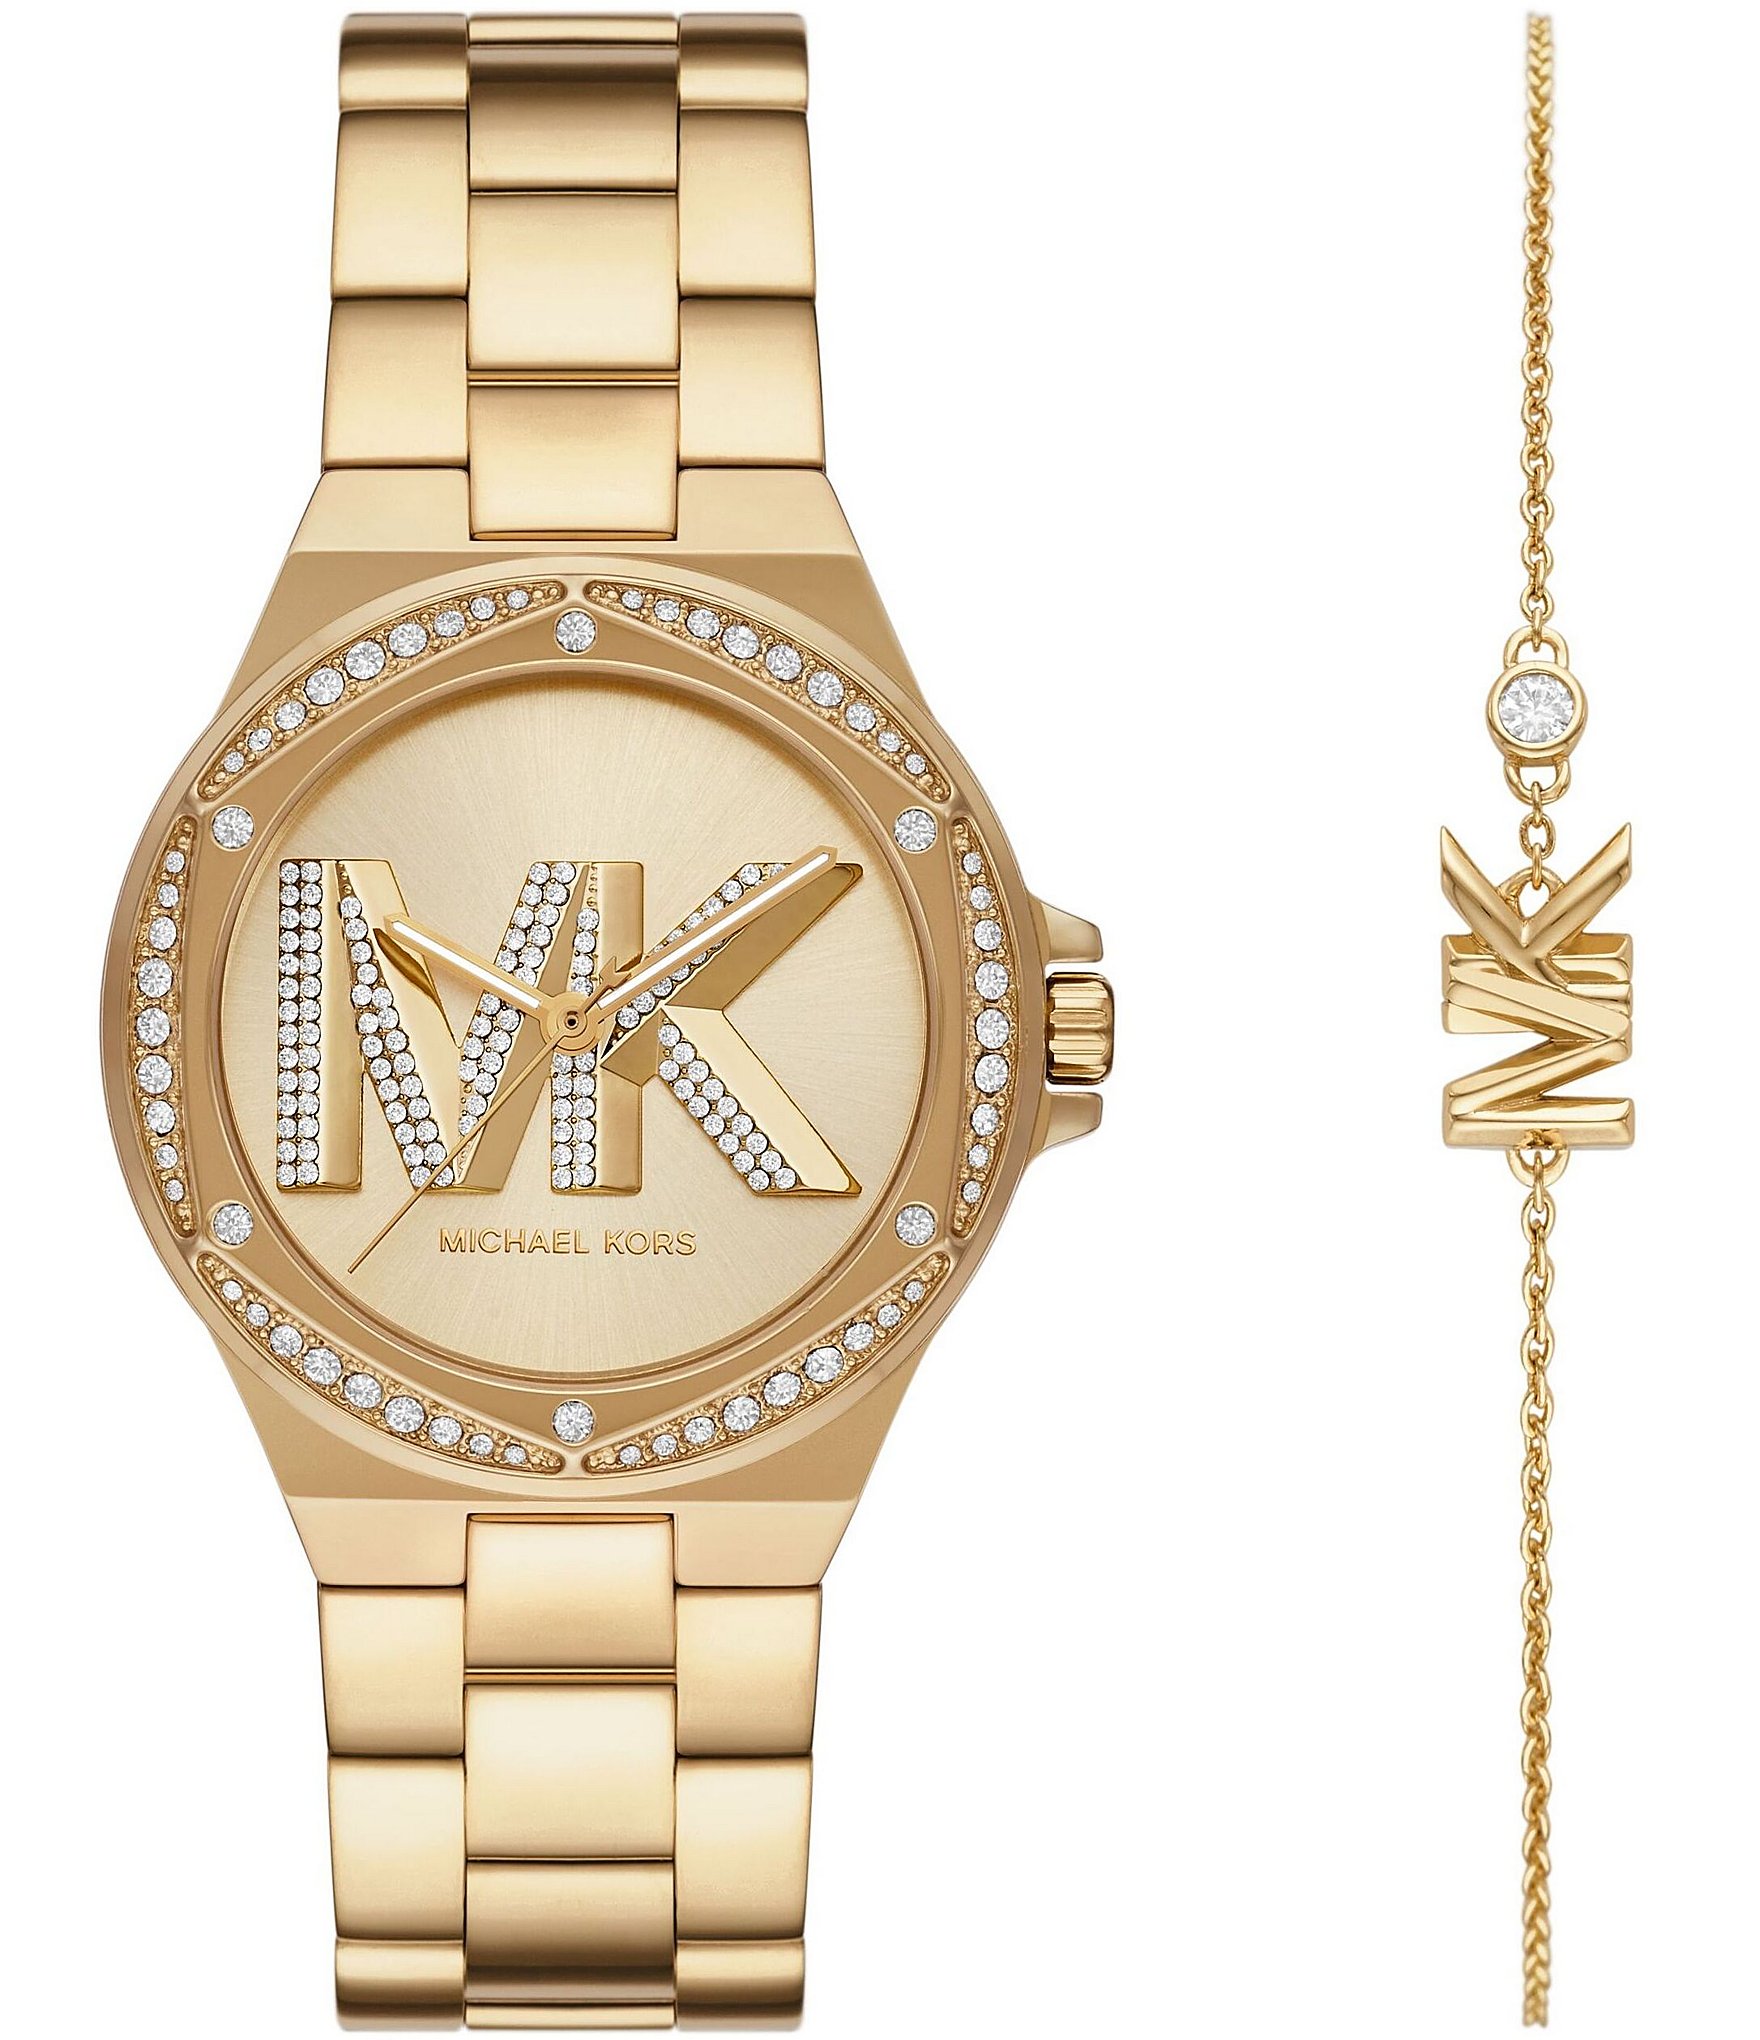 Michael Kors Womens Watches  Watch Station  Hong Kong Official Site for  Authentic Designer Watches Smartwatches  Jewelry